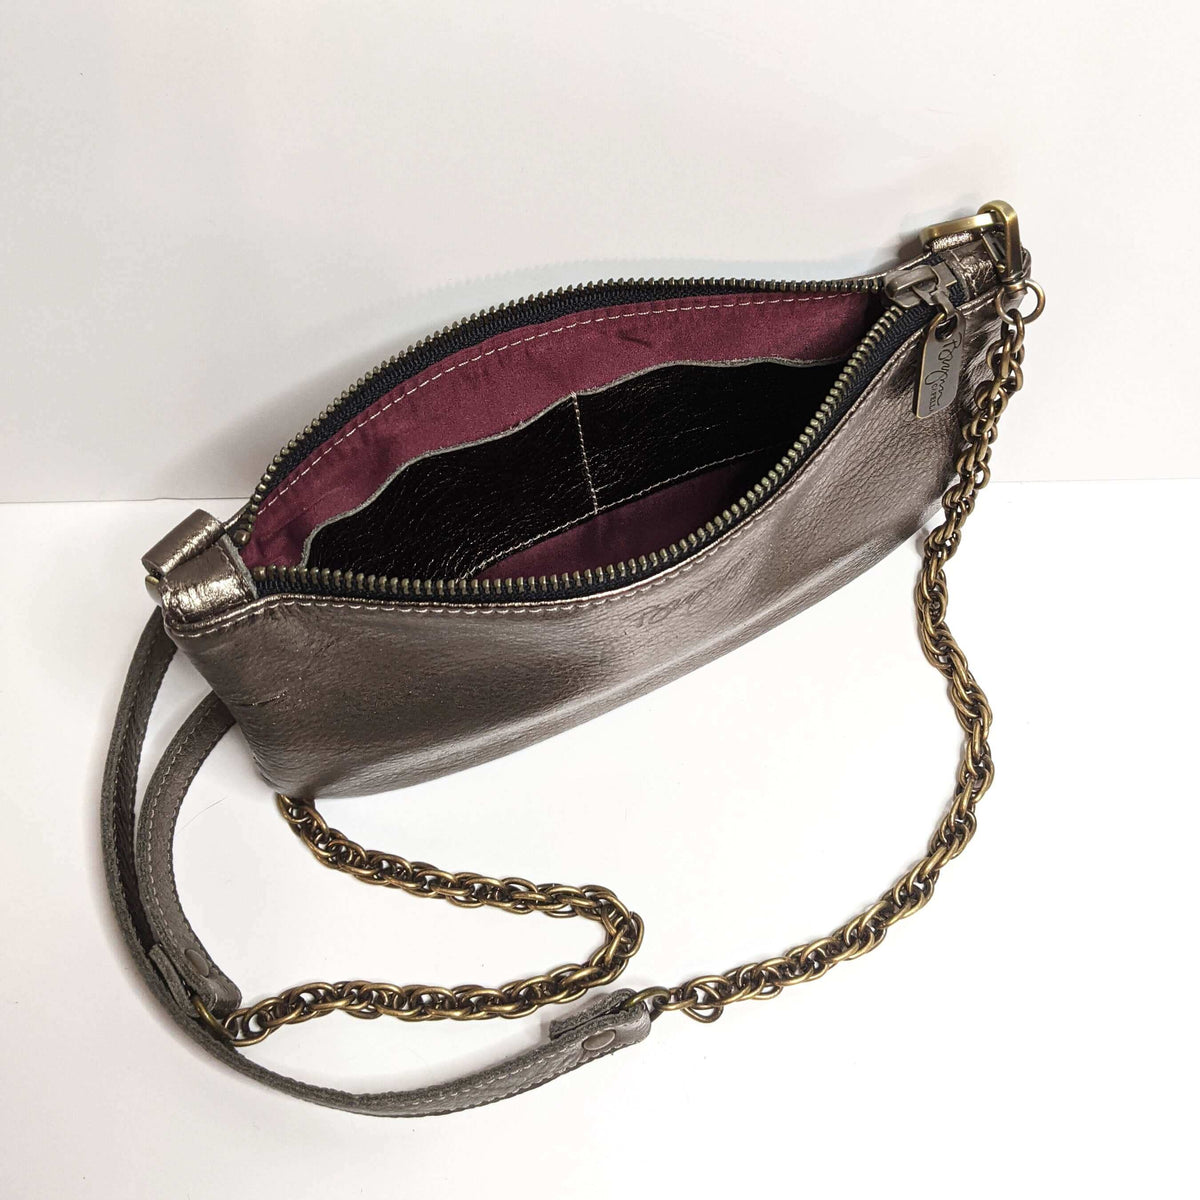 Mini Pewter Metallic Leather Crossbody, Made in the USA by Brynn Capella